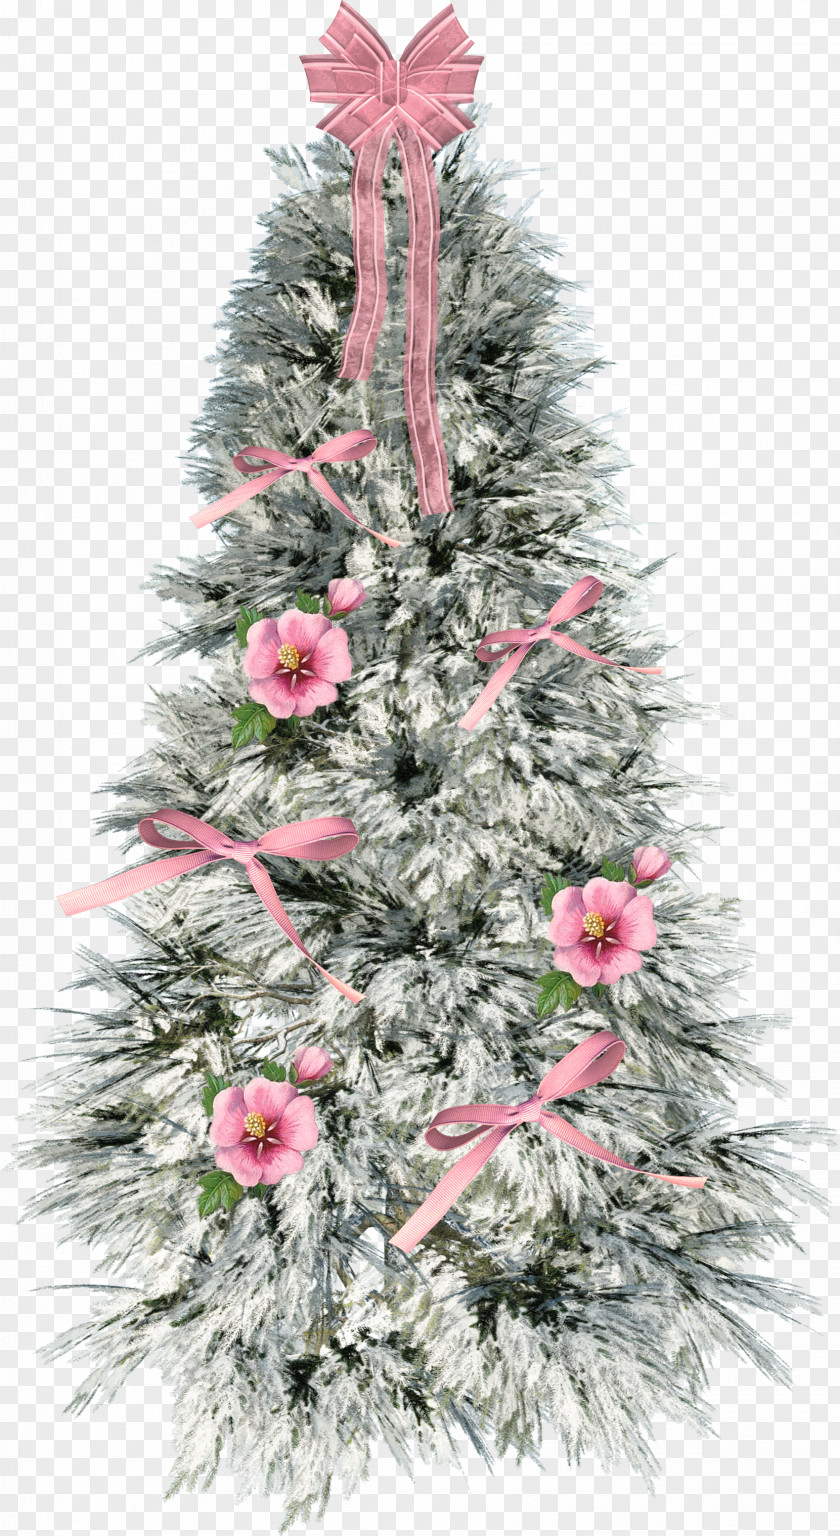 Aime Frame Christmas Tree Fir Santa Claus Day Decoration PNG